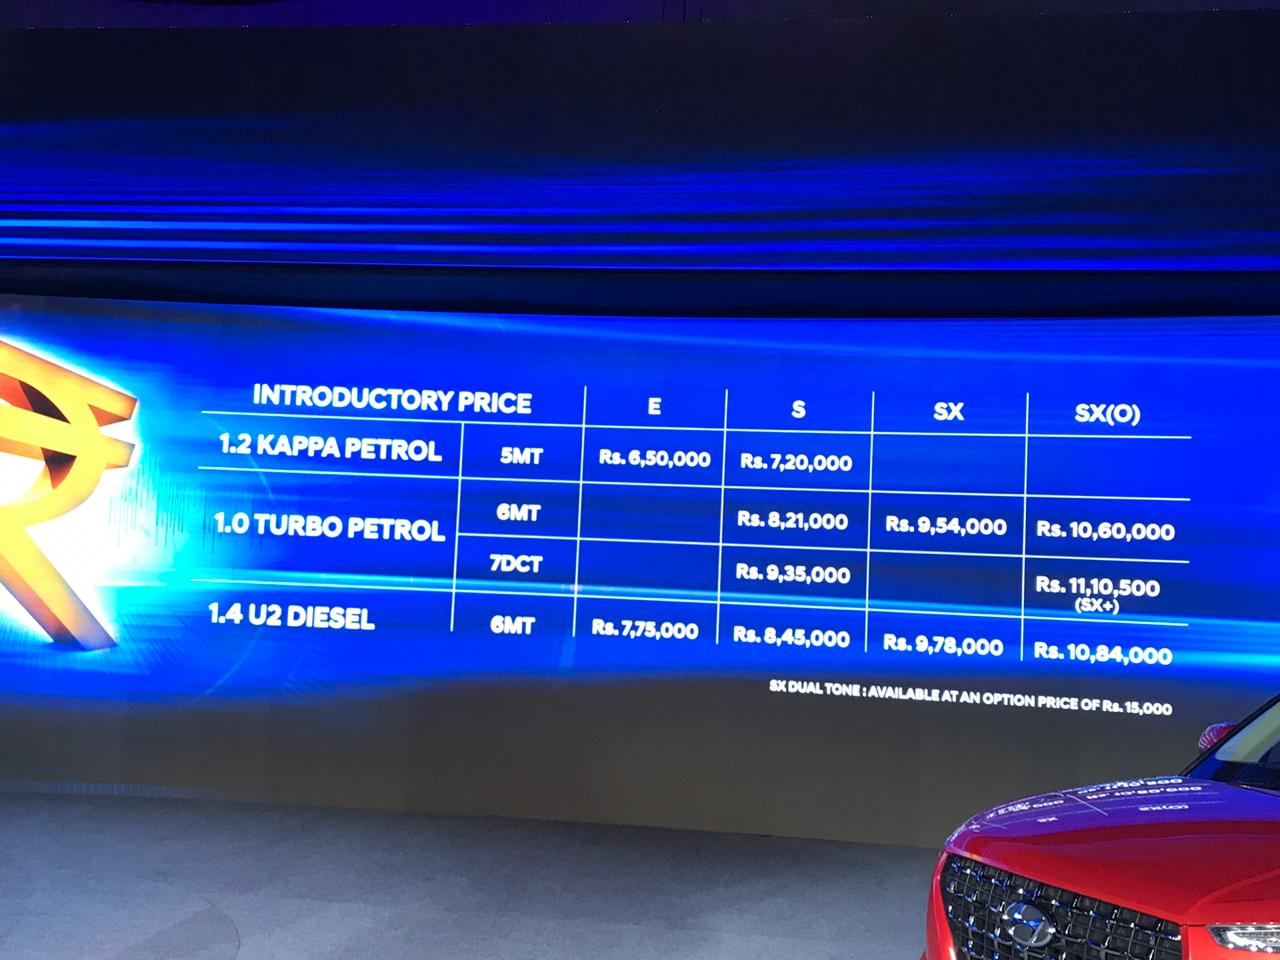 <p>The base 1.2 petrol can be had for as little as Rs 6.5 lakh but only in the lower E and S trims The tech-heavy 1.0 litre turbo petrol comes in S, SX and SX(O), starting at Rs 8.21 lakh and going up to Rs 10.60 lakh. The seven-speed DCt only comes in the S and SX+ trims, this lowers the entry price to Rs 9.35 lakh. The diesel is available in all four trims, starting at Rs 7.75 lakh.</p>